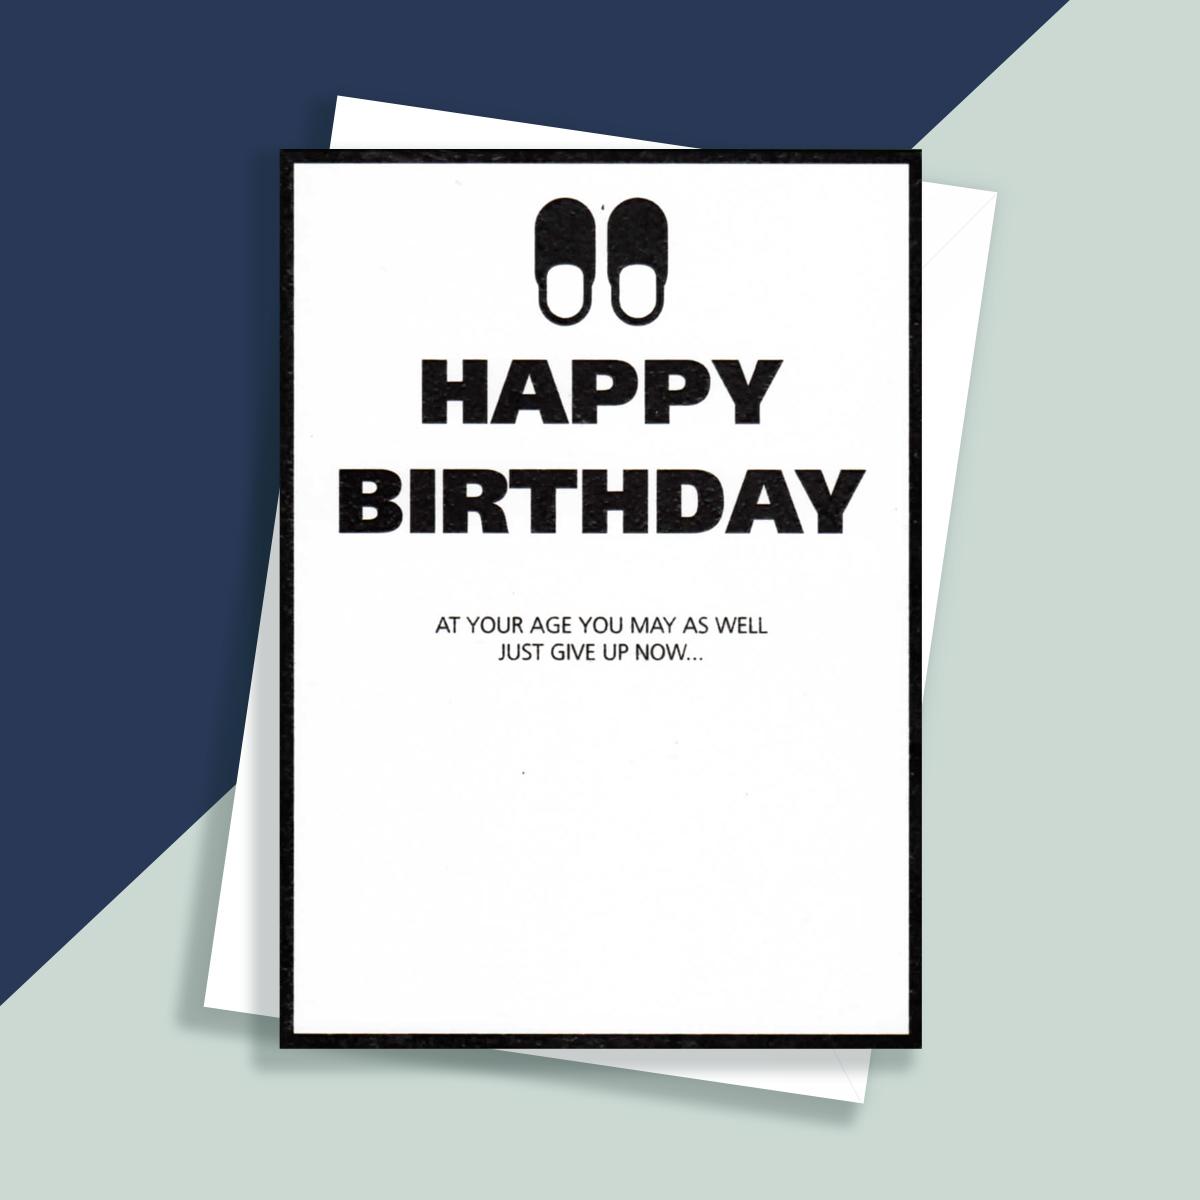 At Your Age Funny Birthday Card Alongside Its White Envelope